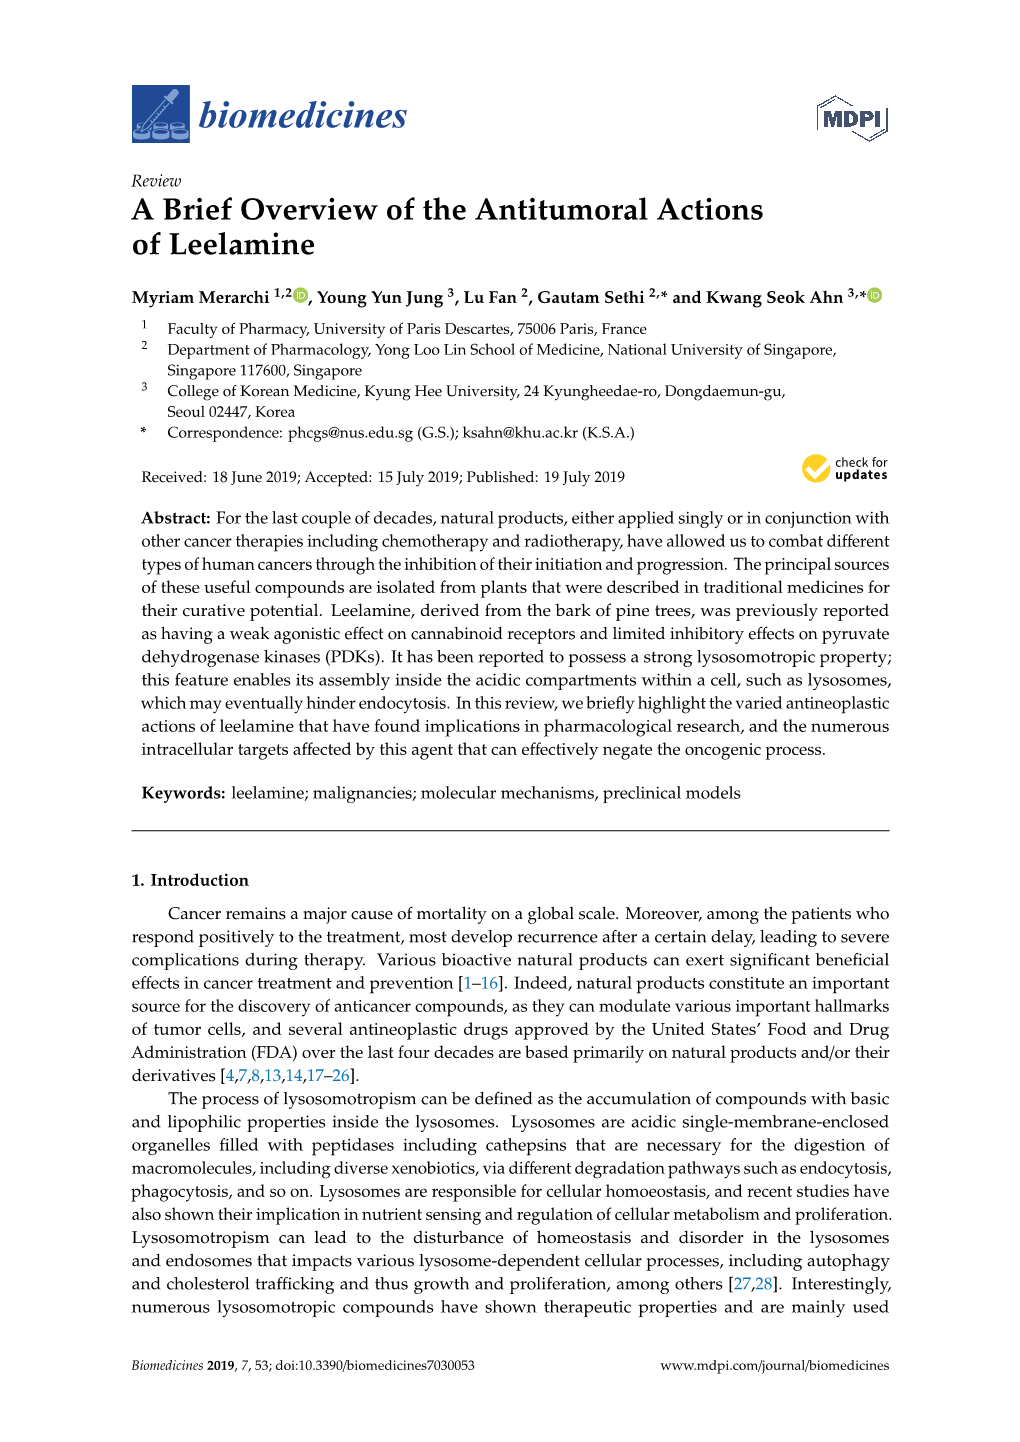 A Brief Overview of the Antitumoral Actions of Leelamine